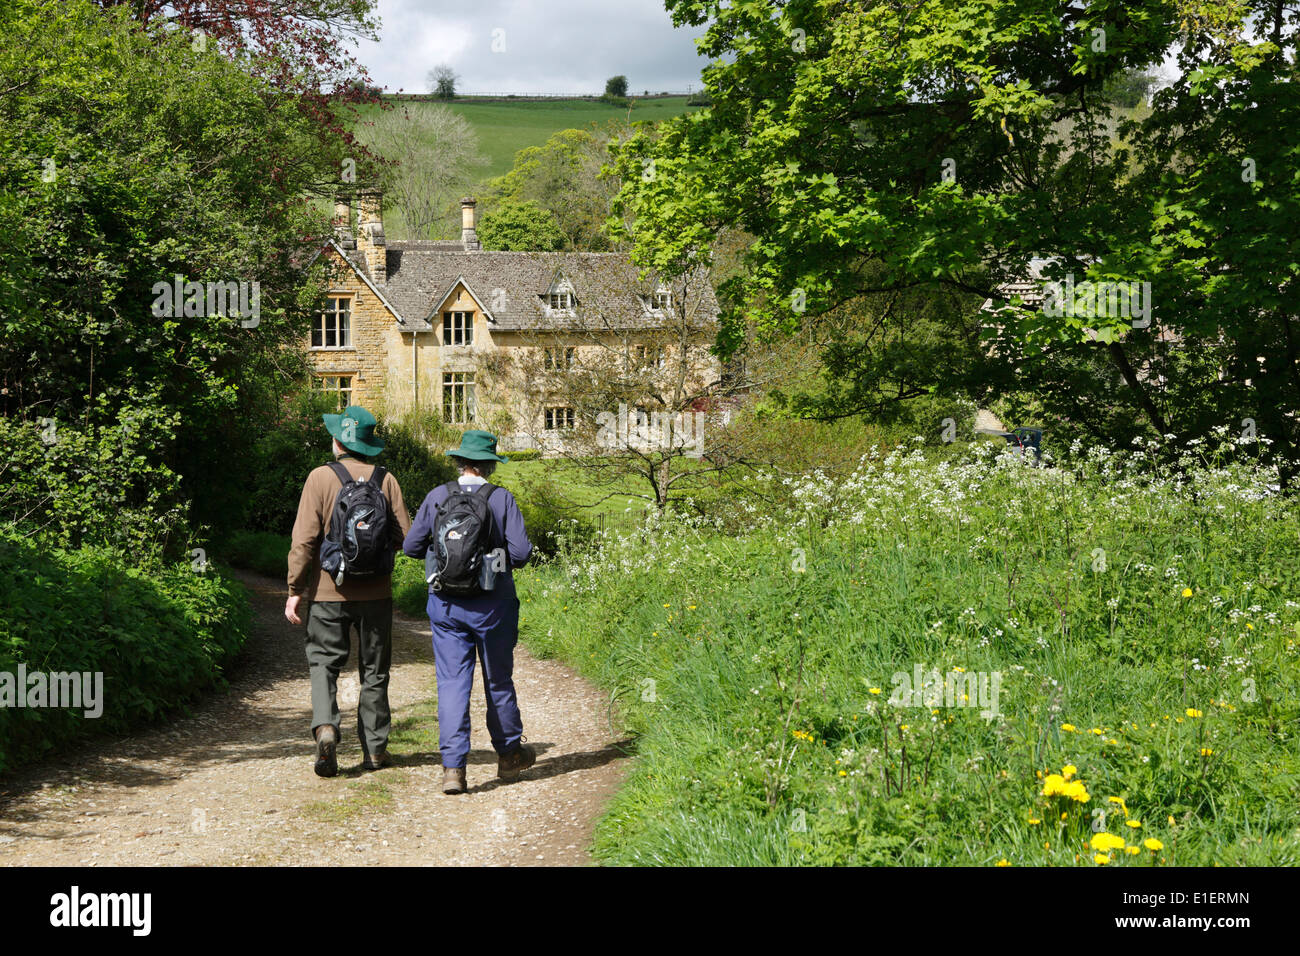 Ramblers on Wardens' Way footpath at Upper Slaughter Stock Photo